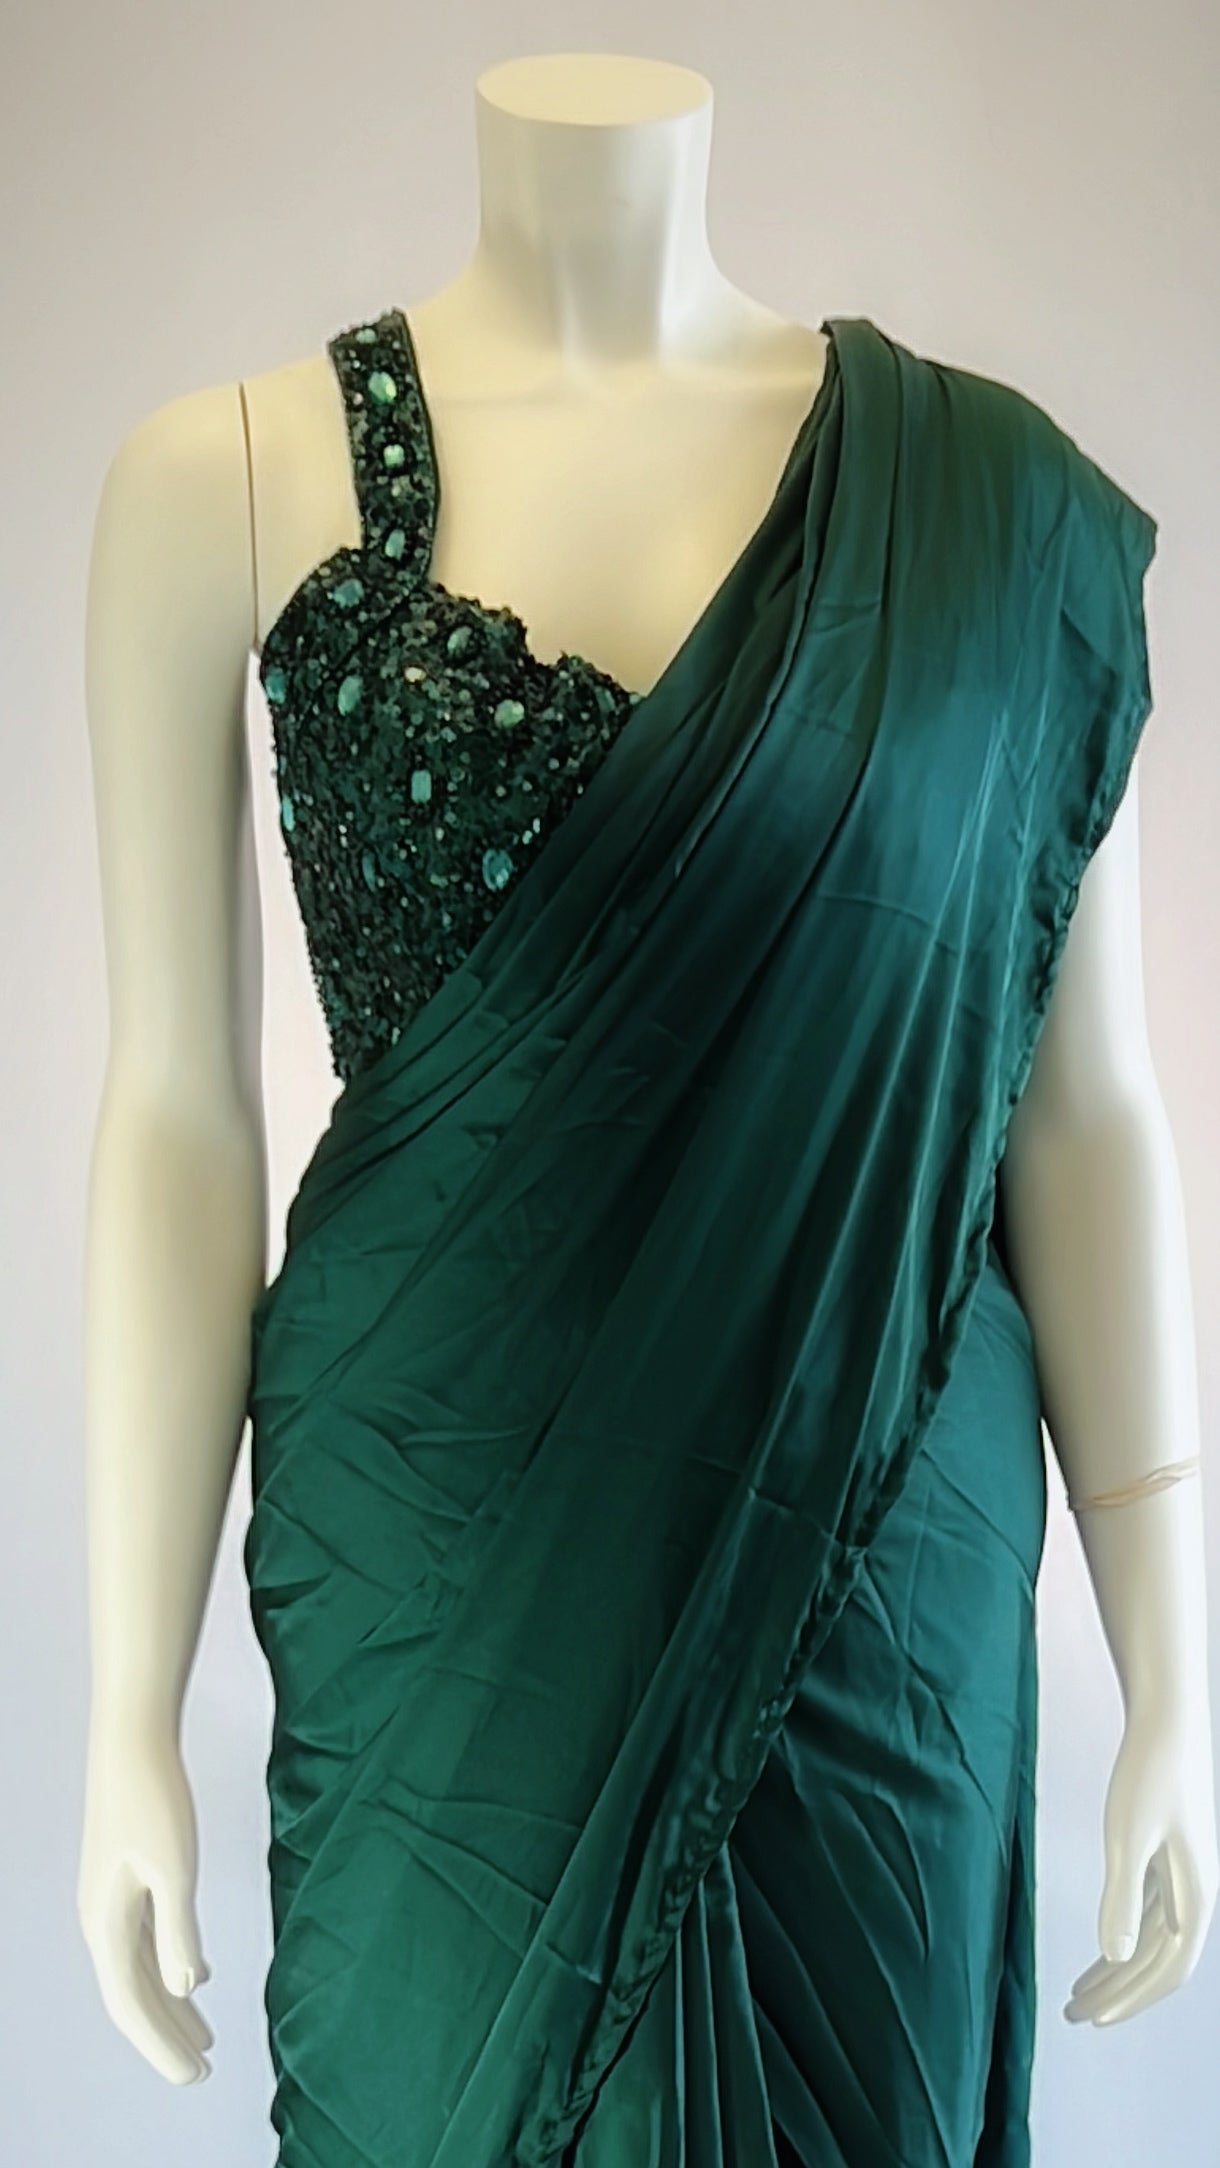 Teal Satin Silk Pre-Draped Saree with Designer Blouse - Elegant and Stylish | Shop Now for Exquisite Fashion